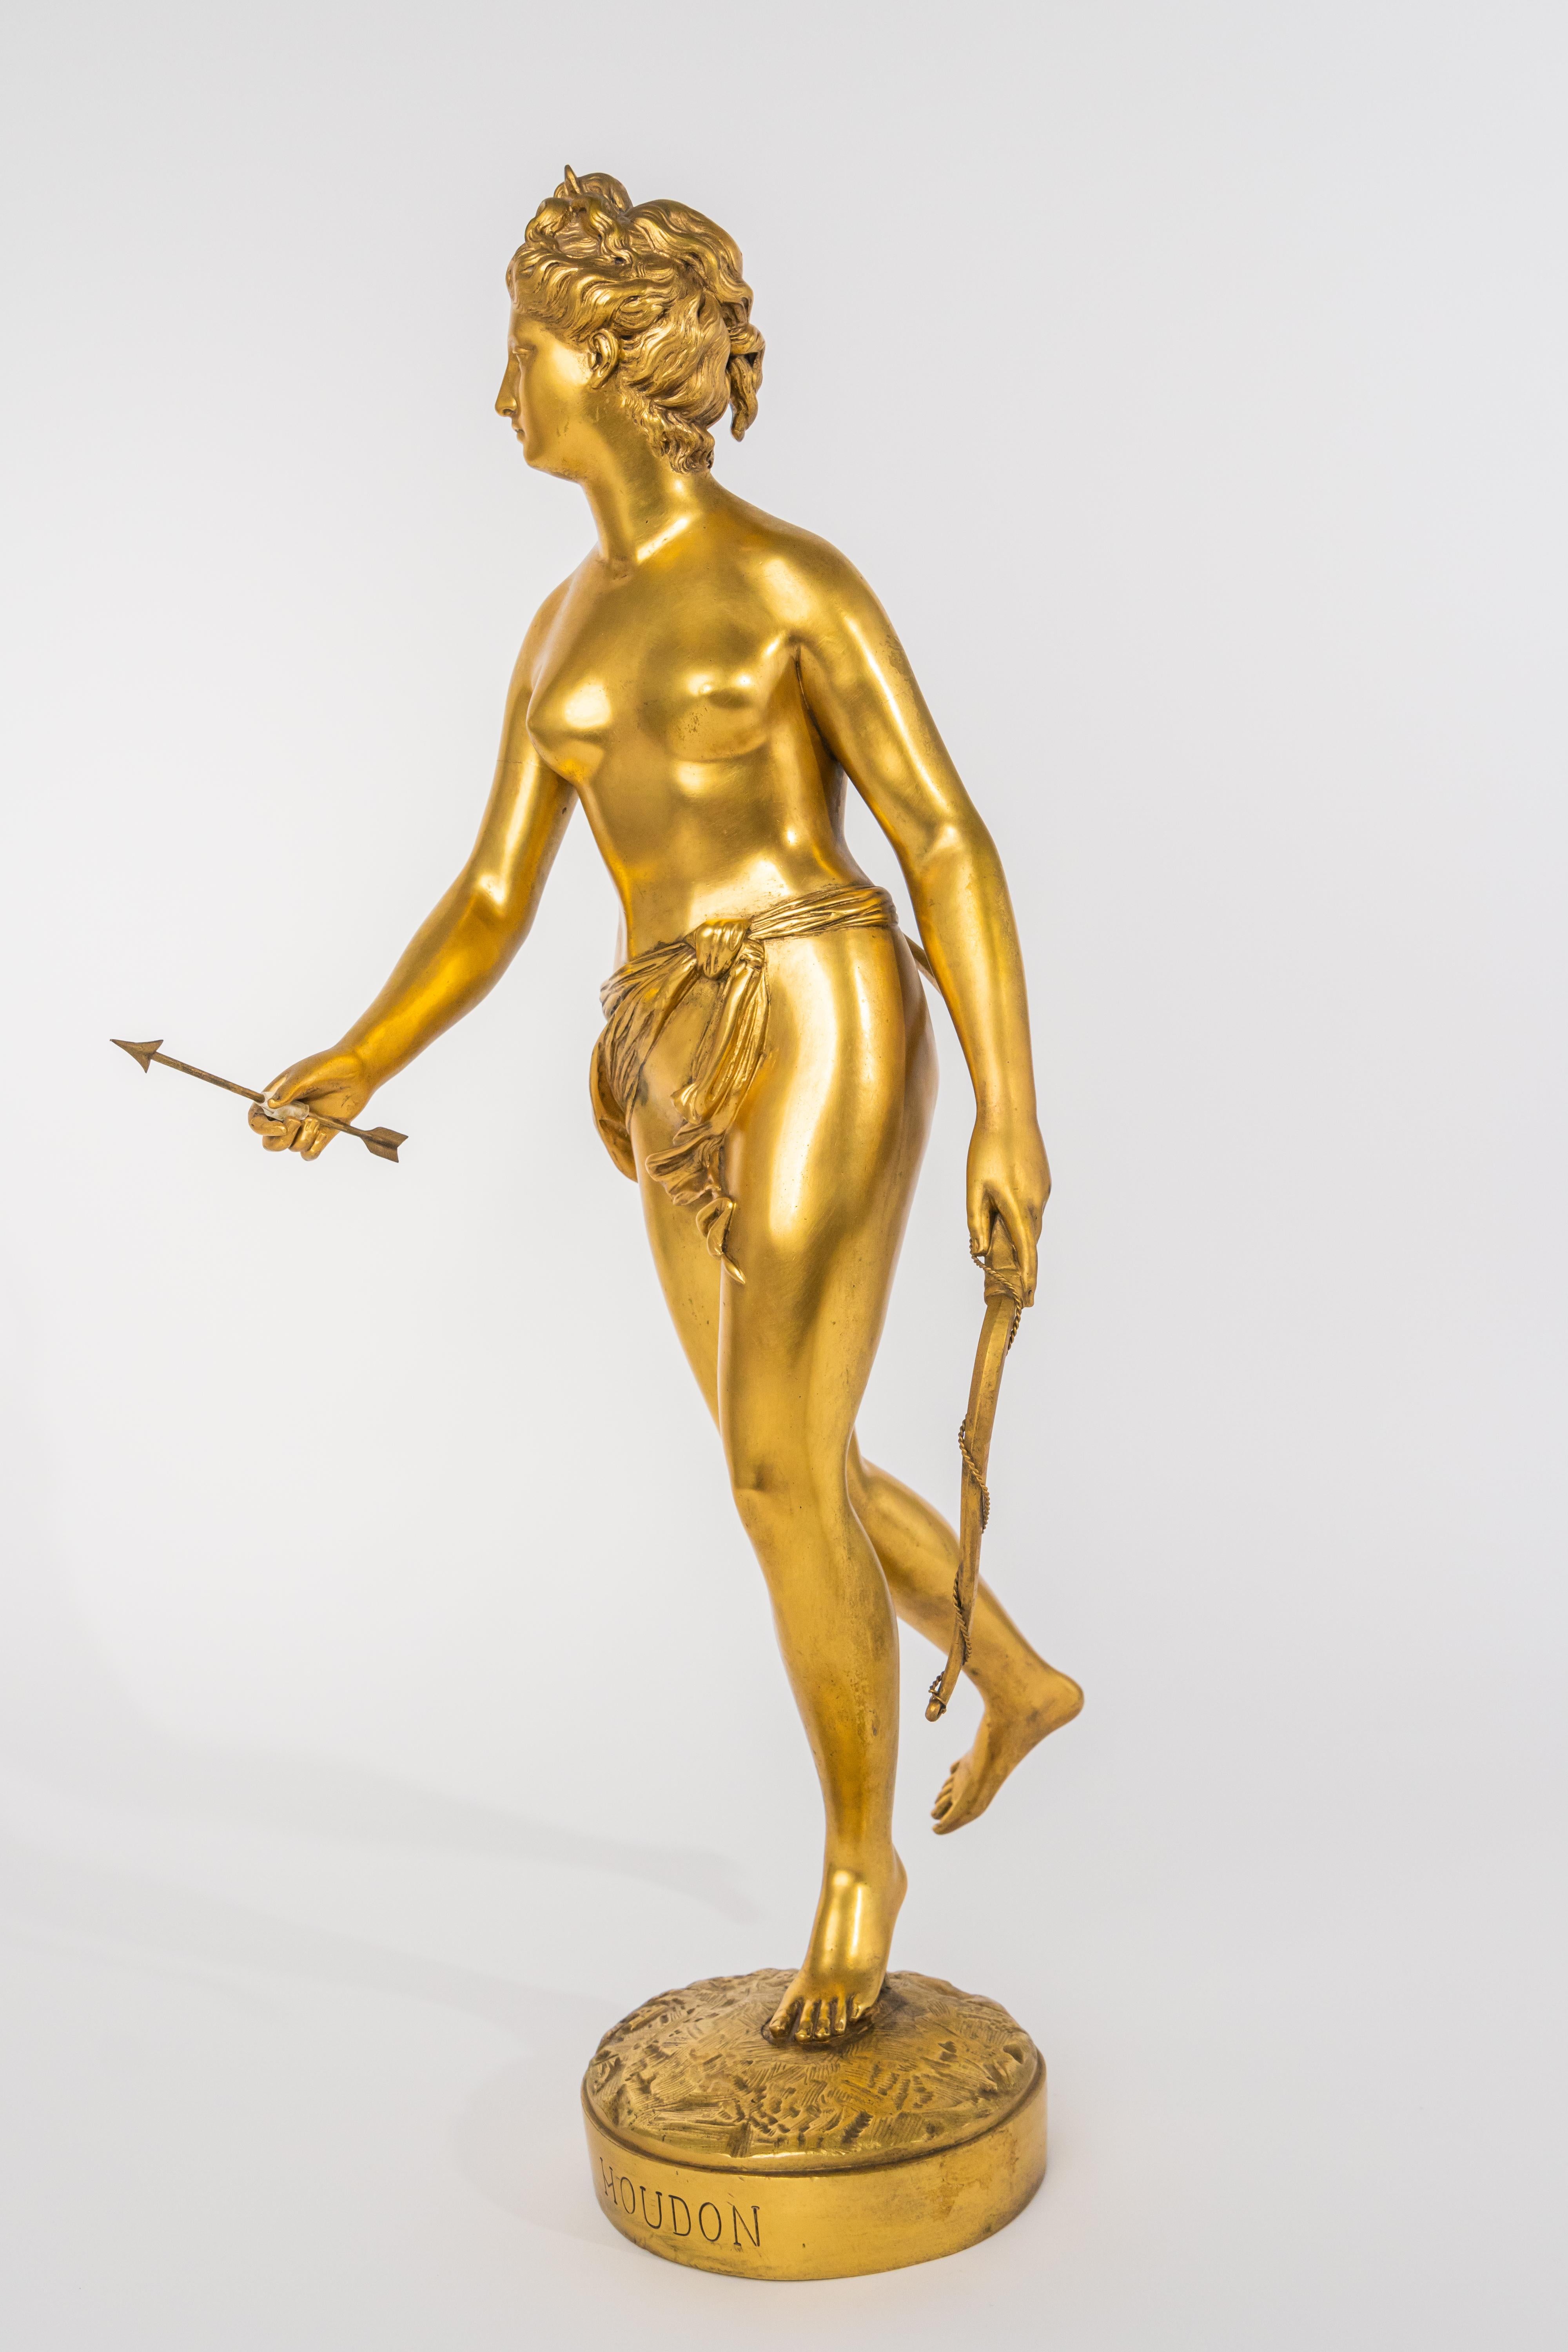 19th Century French Gilt Bronze Sculpture of Diana the Huntress 1